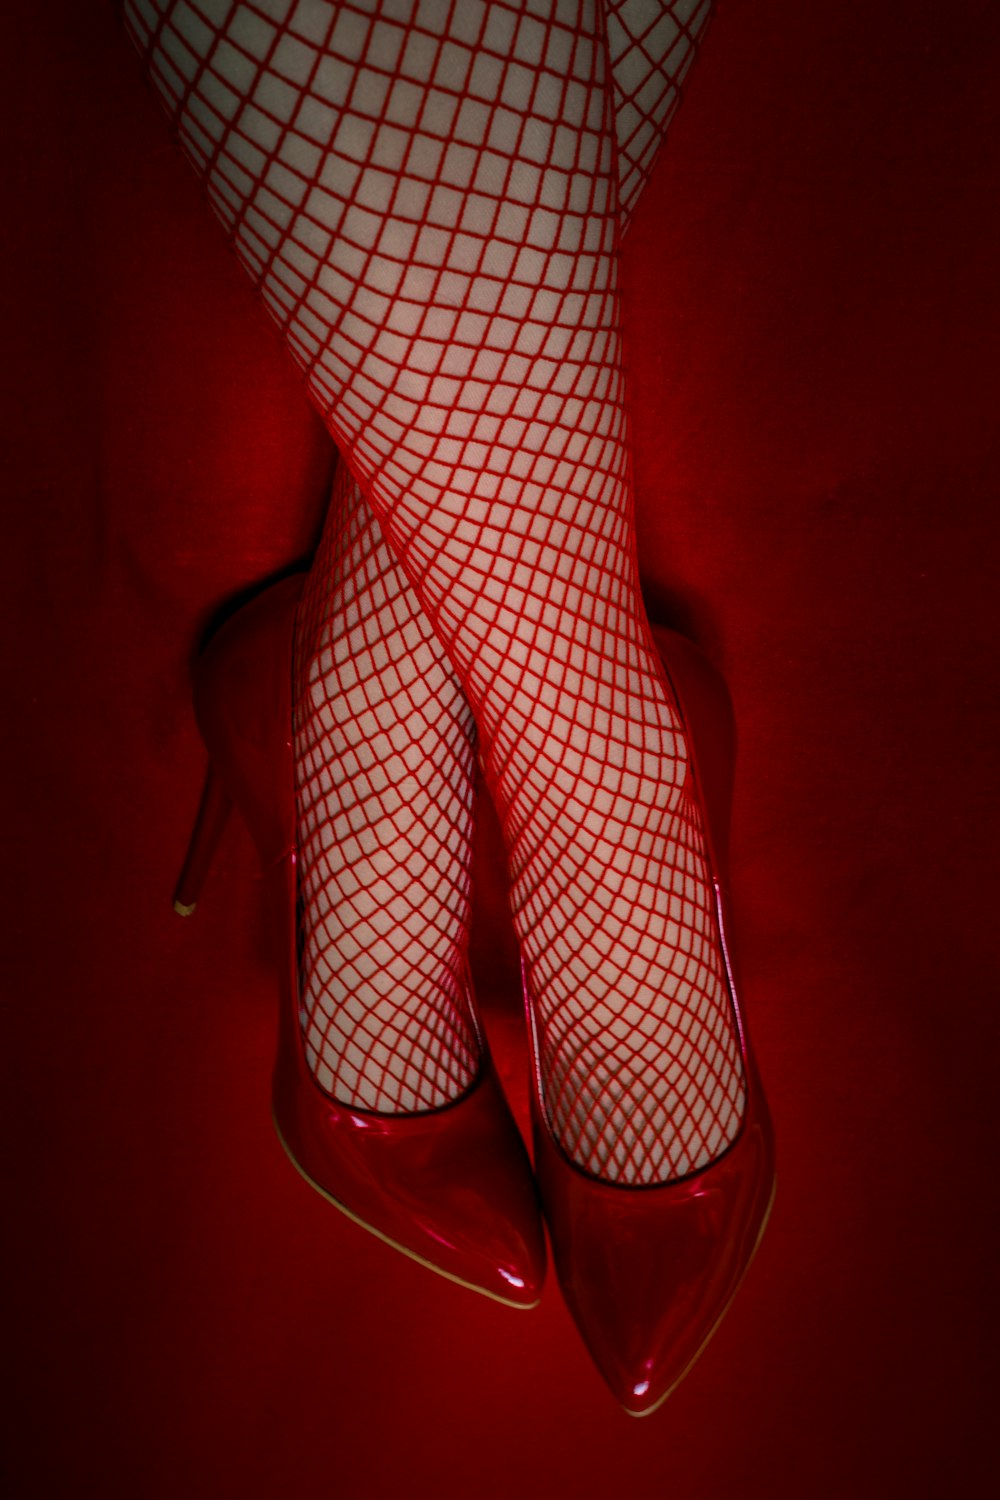 a close up of a person's legs wearing red shoes